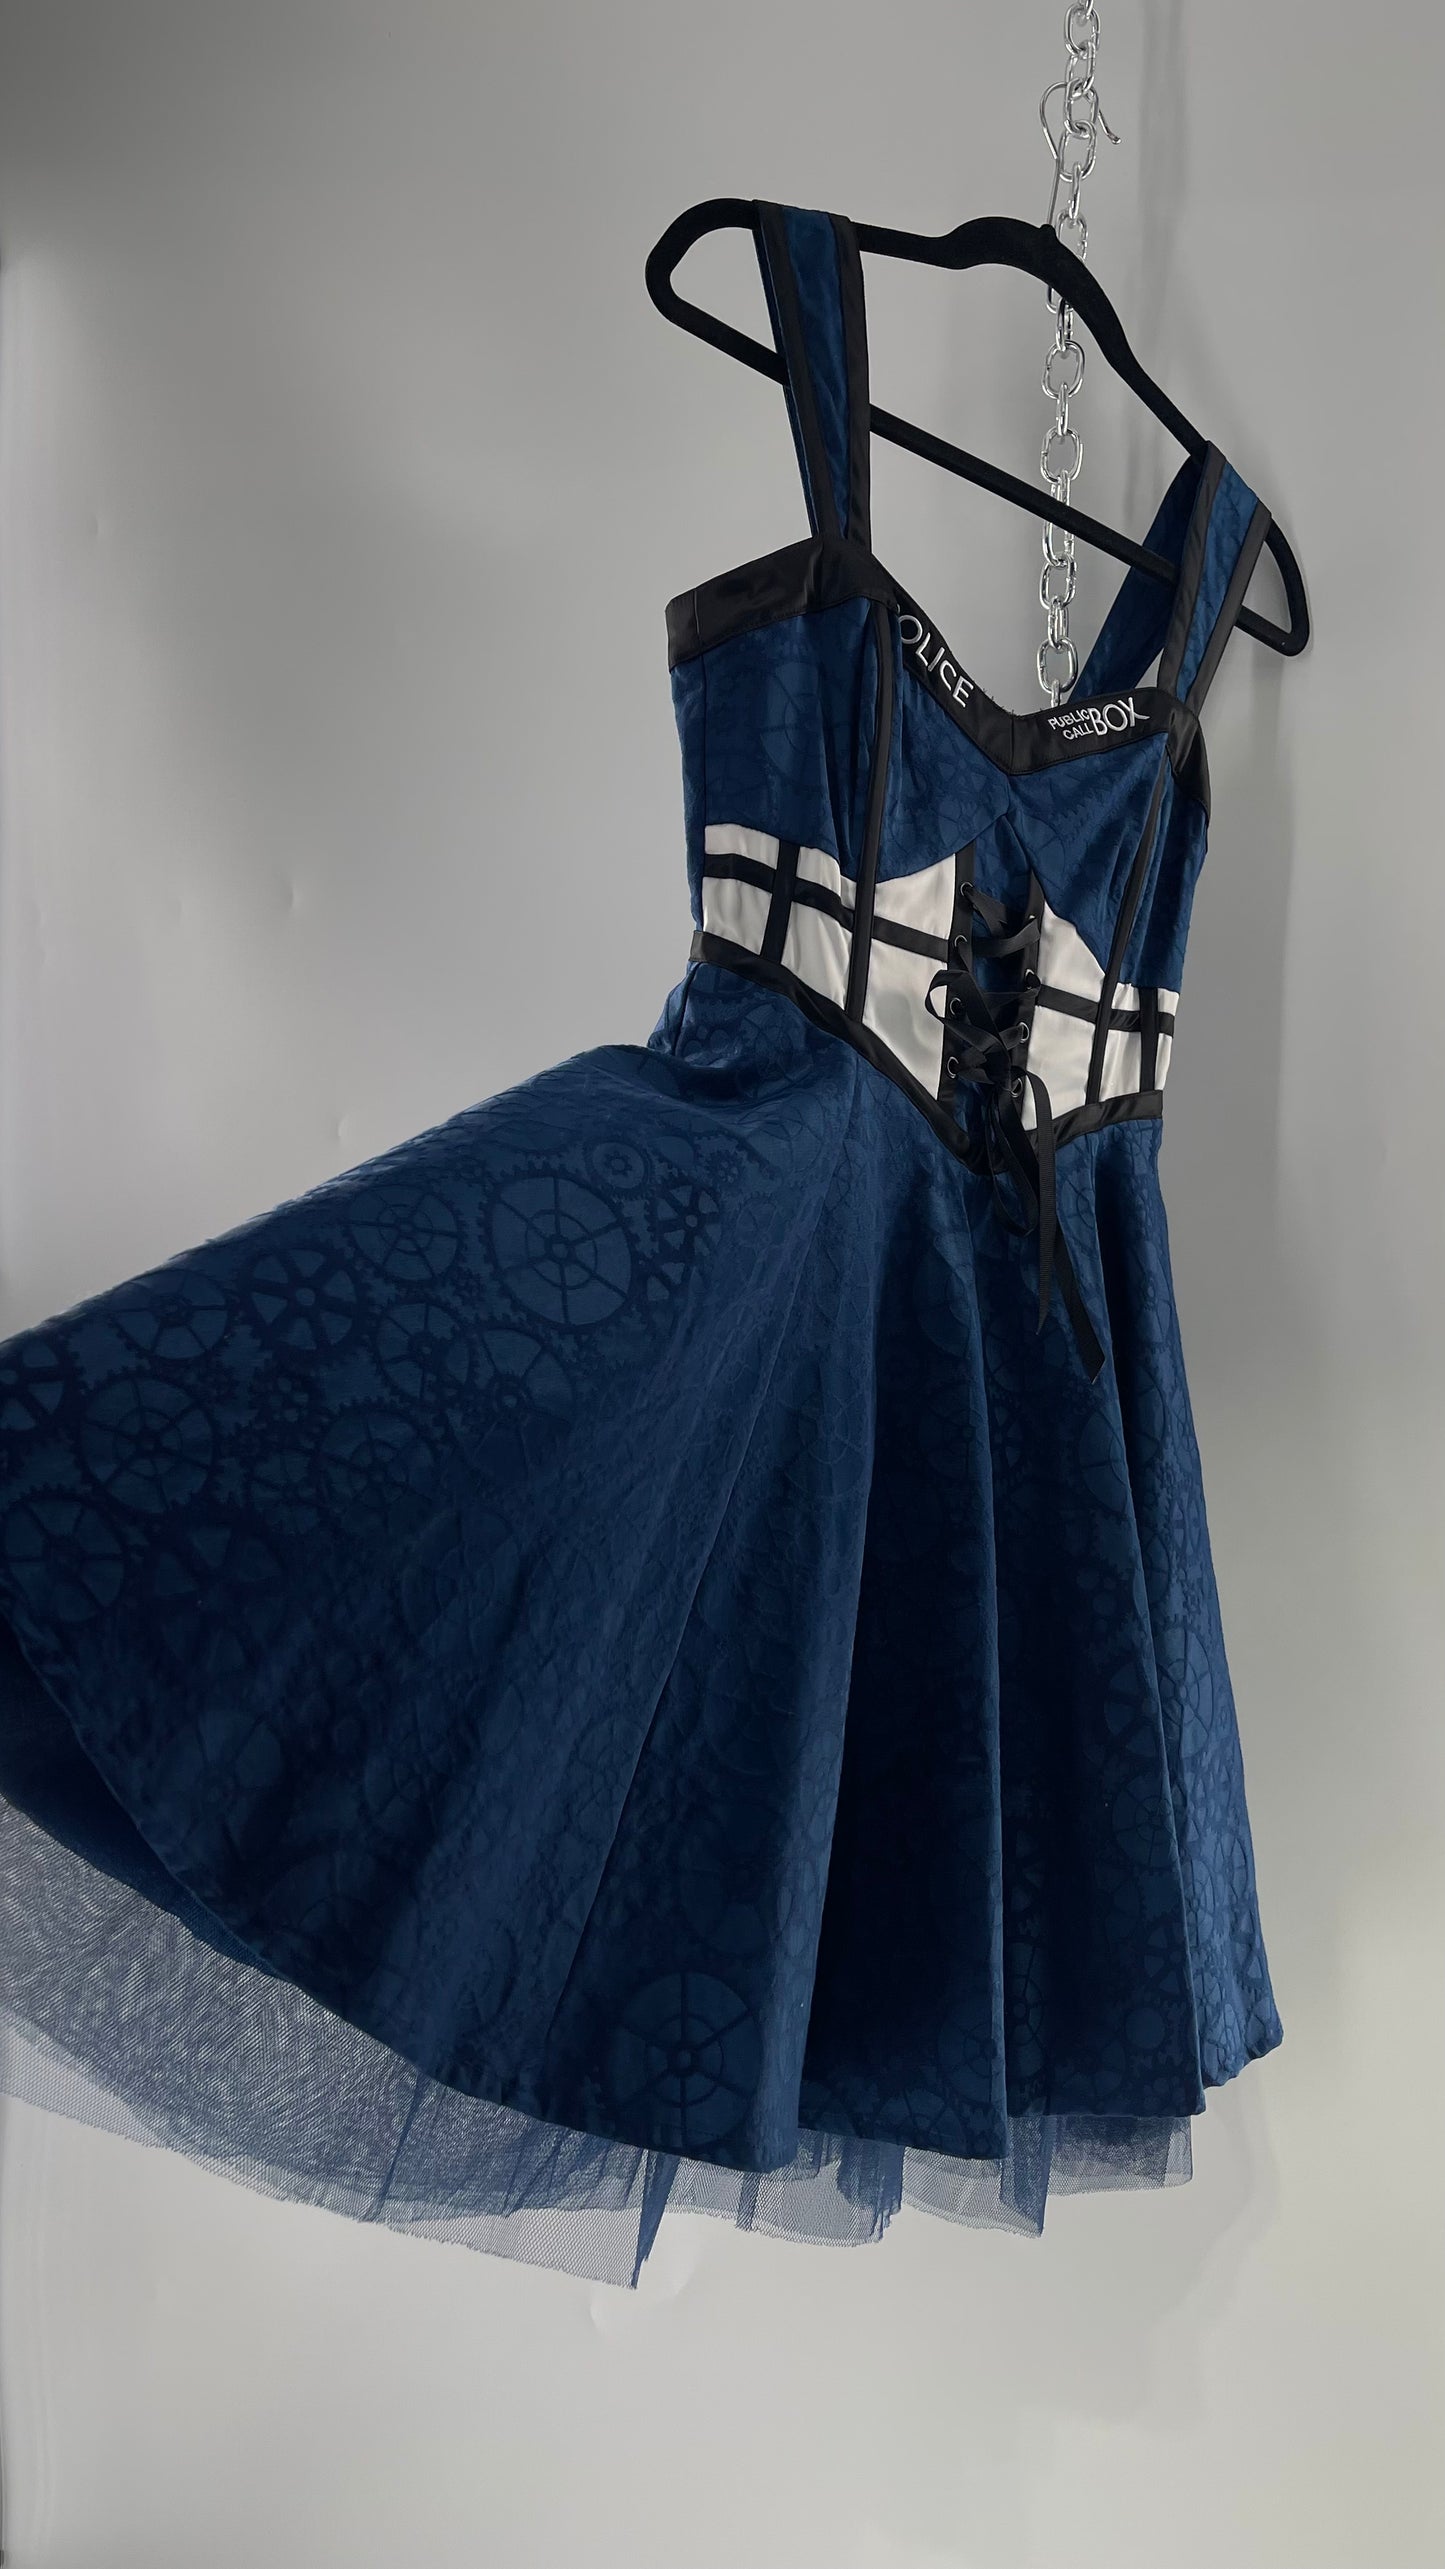 BBC Doctor Who Tardis 50s Vintage Style Dress with Tulle Underskirt (SM)